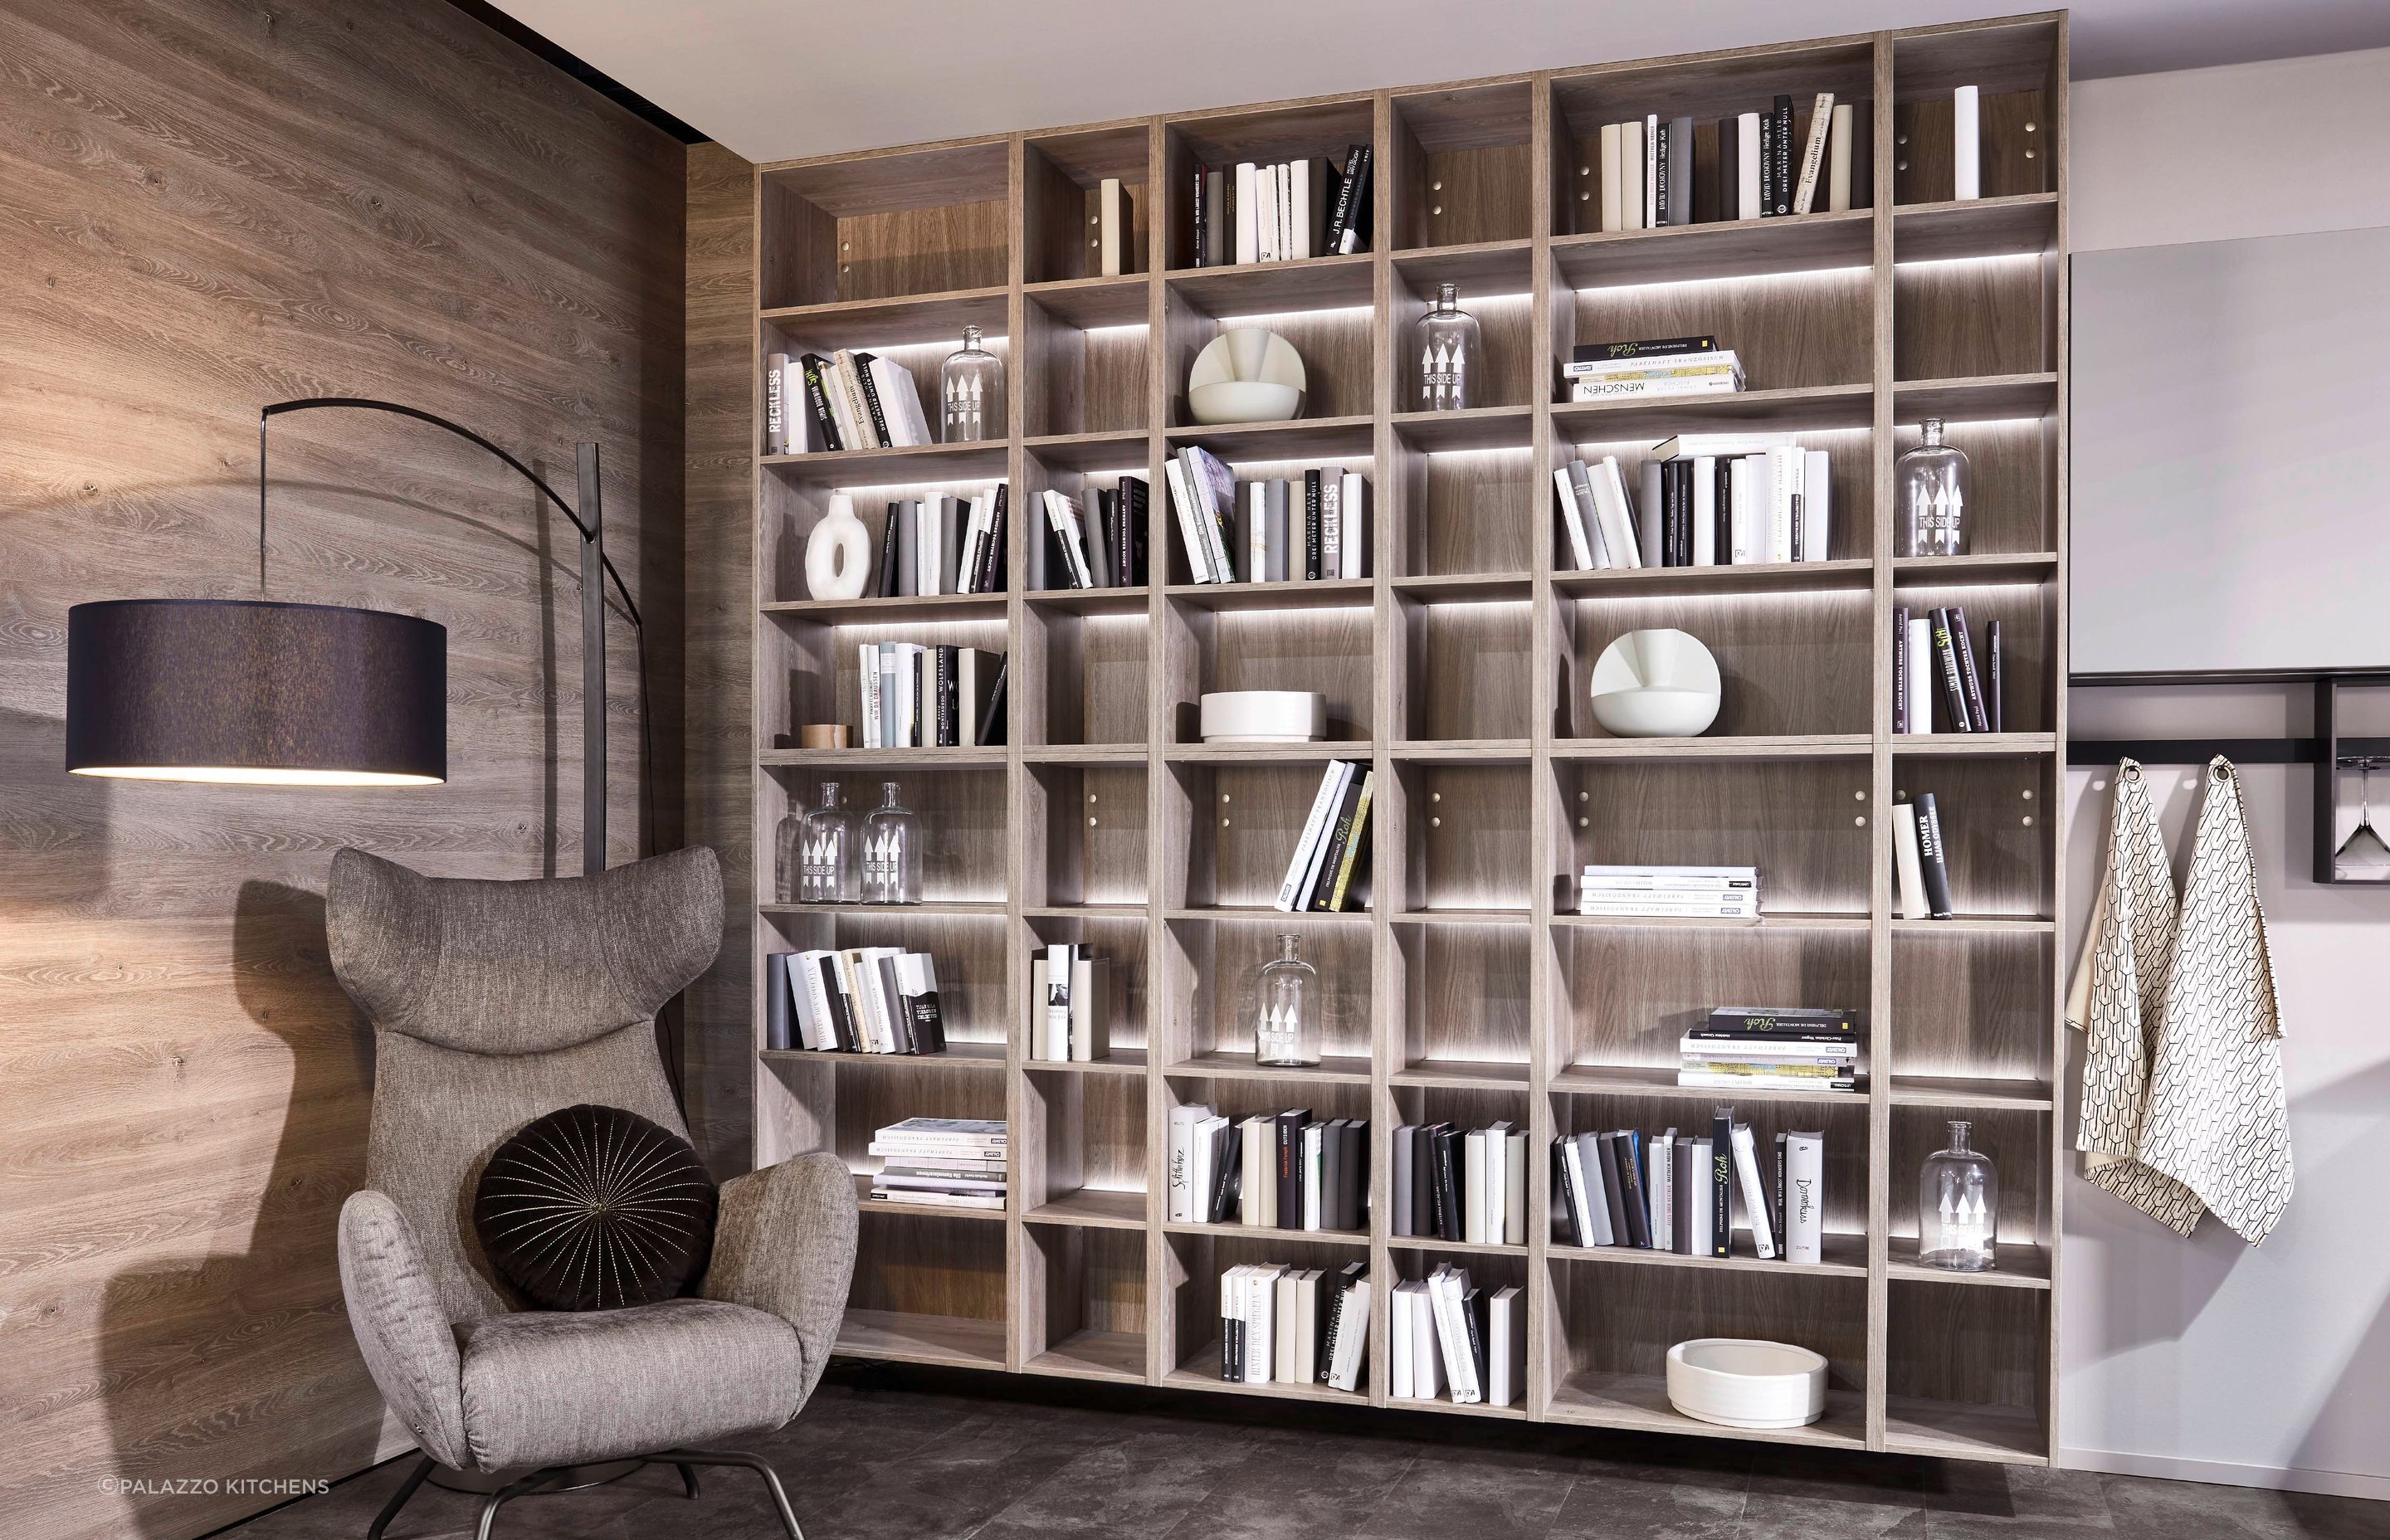 LED lighting can elevate and enhance a bookcase instantly, demonstrated with aplomb with this wall shelving system.